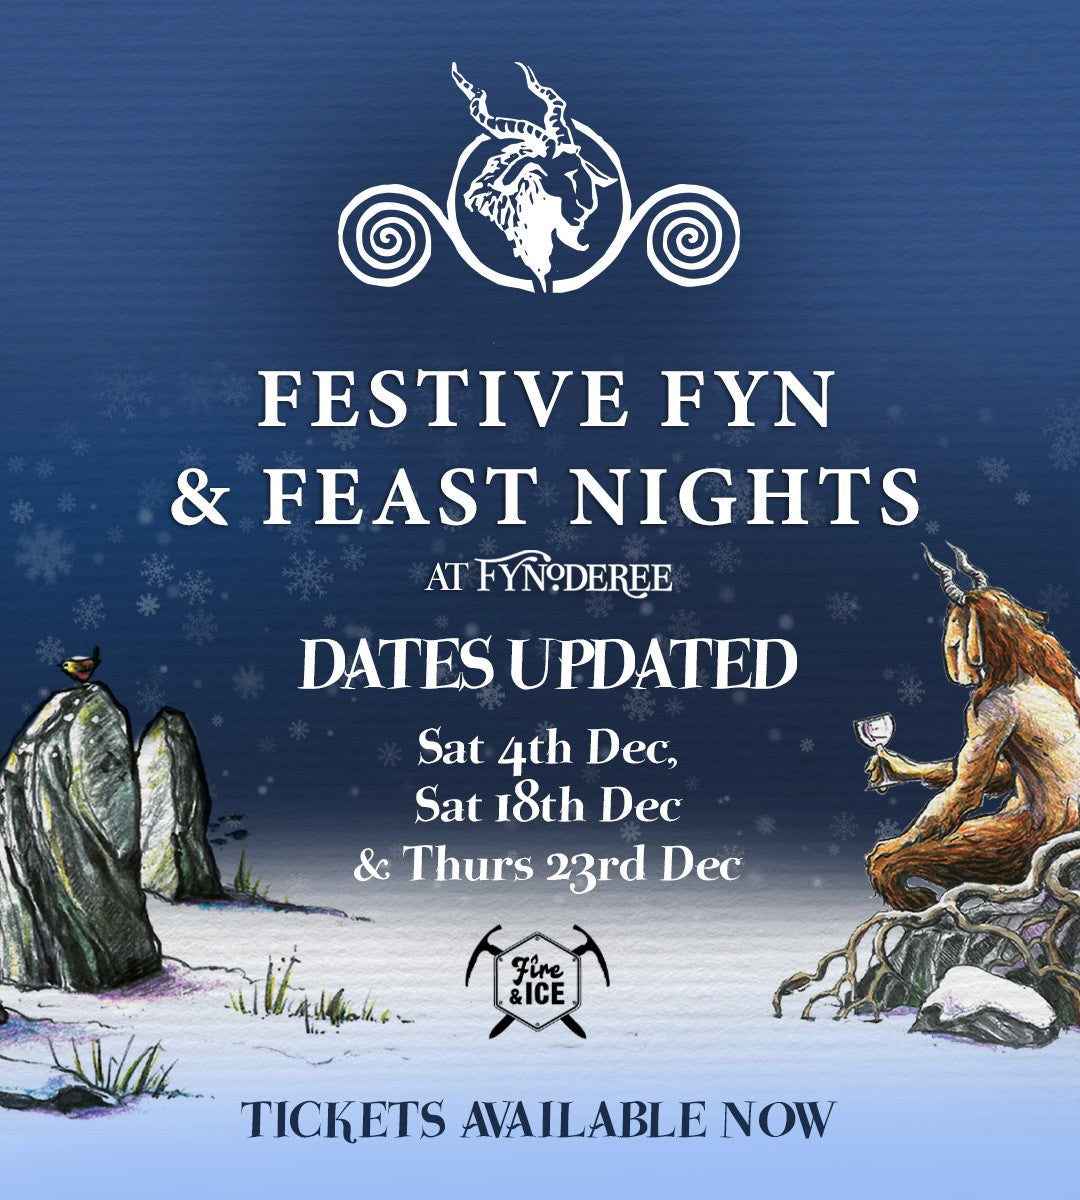 Festive Fyn & Feast Events - 4th, 18th & 23rd December - SOLD OUT